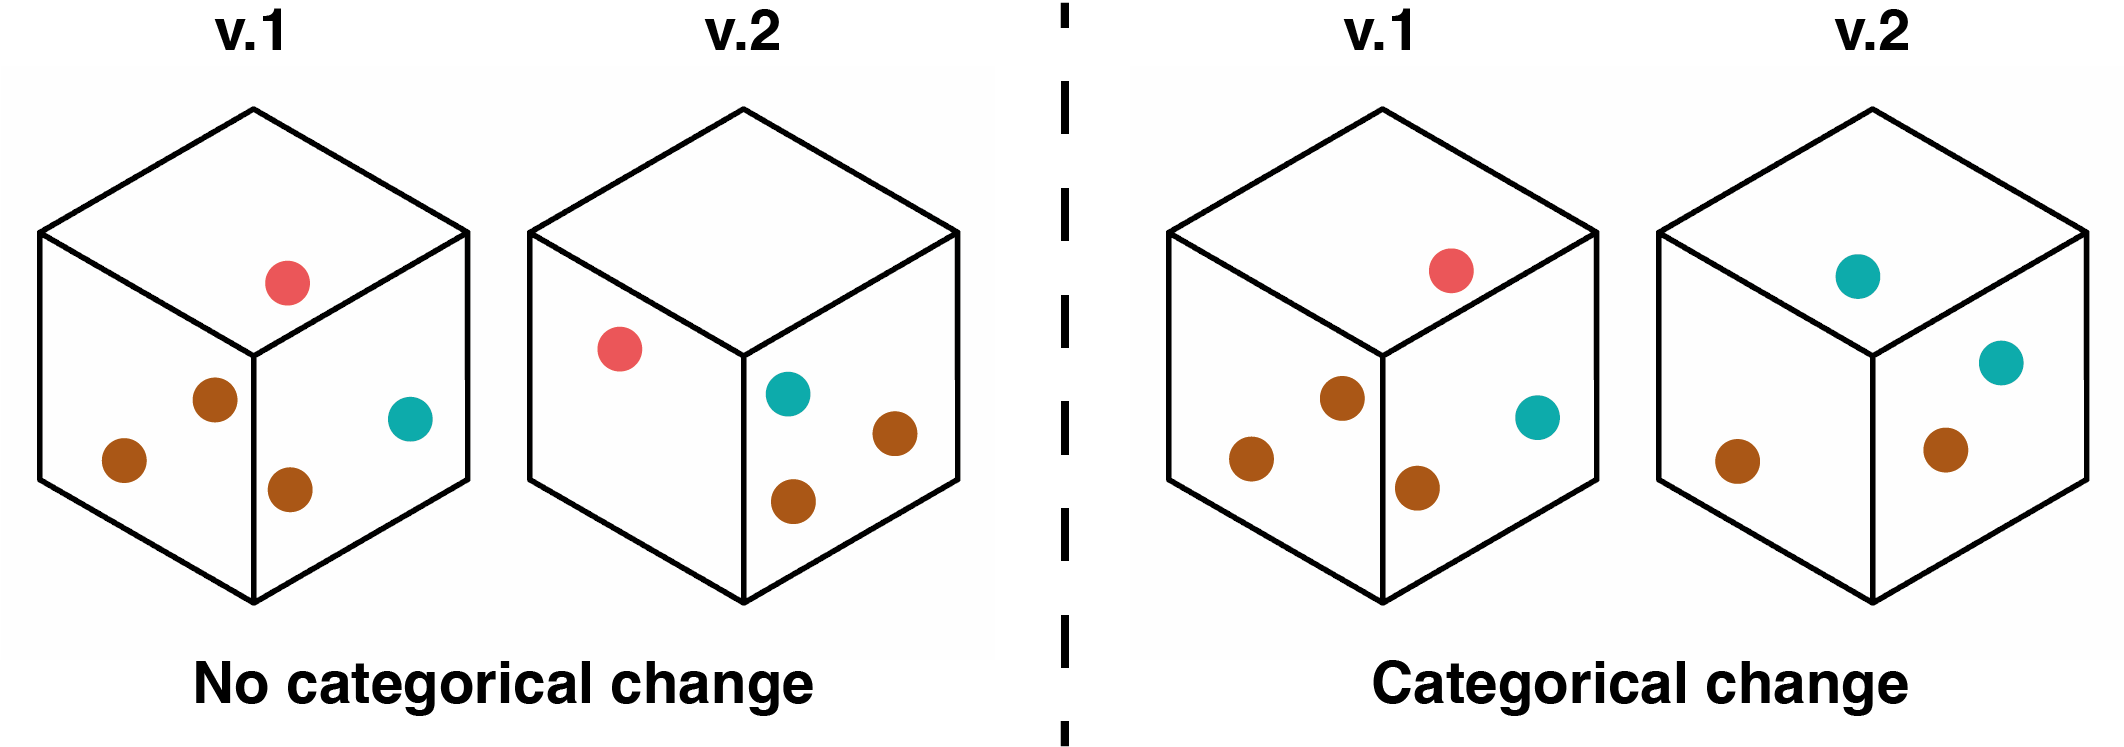 Example of a situation with and without a categorical change